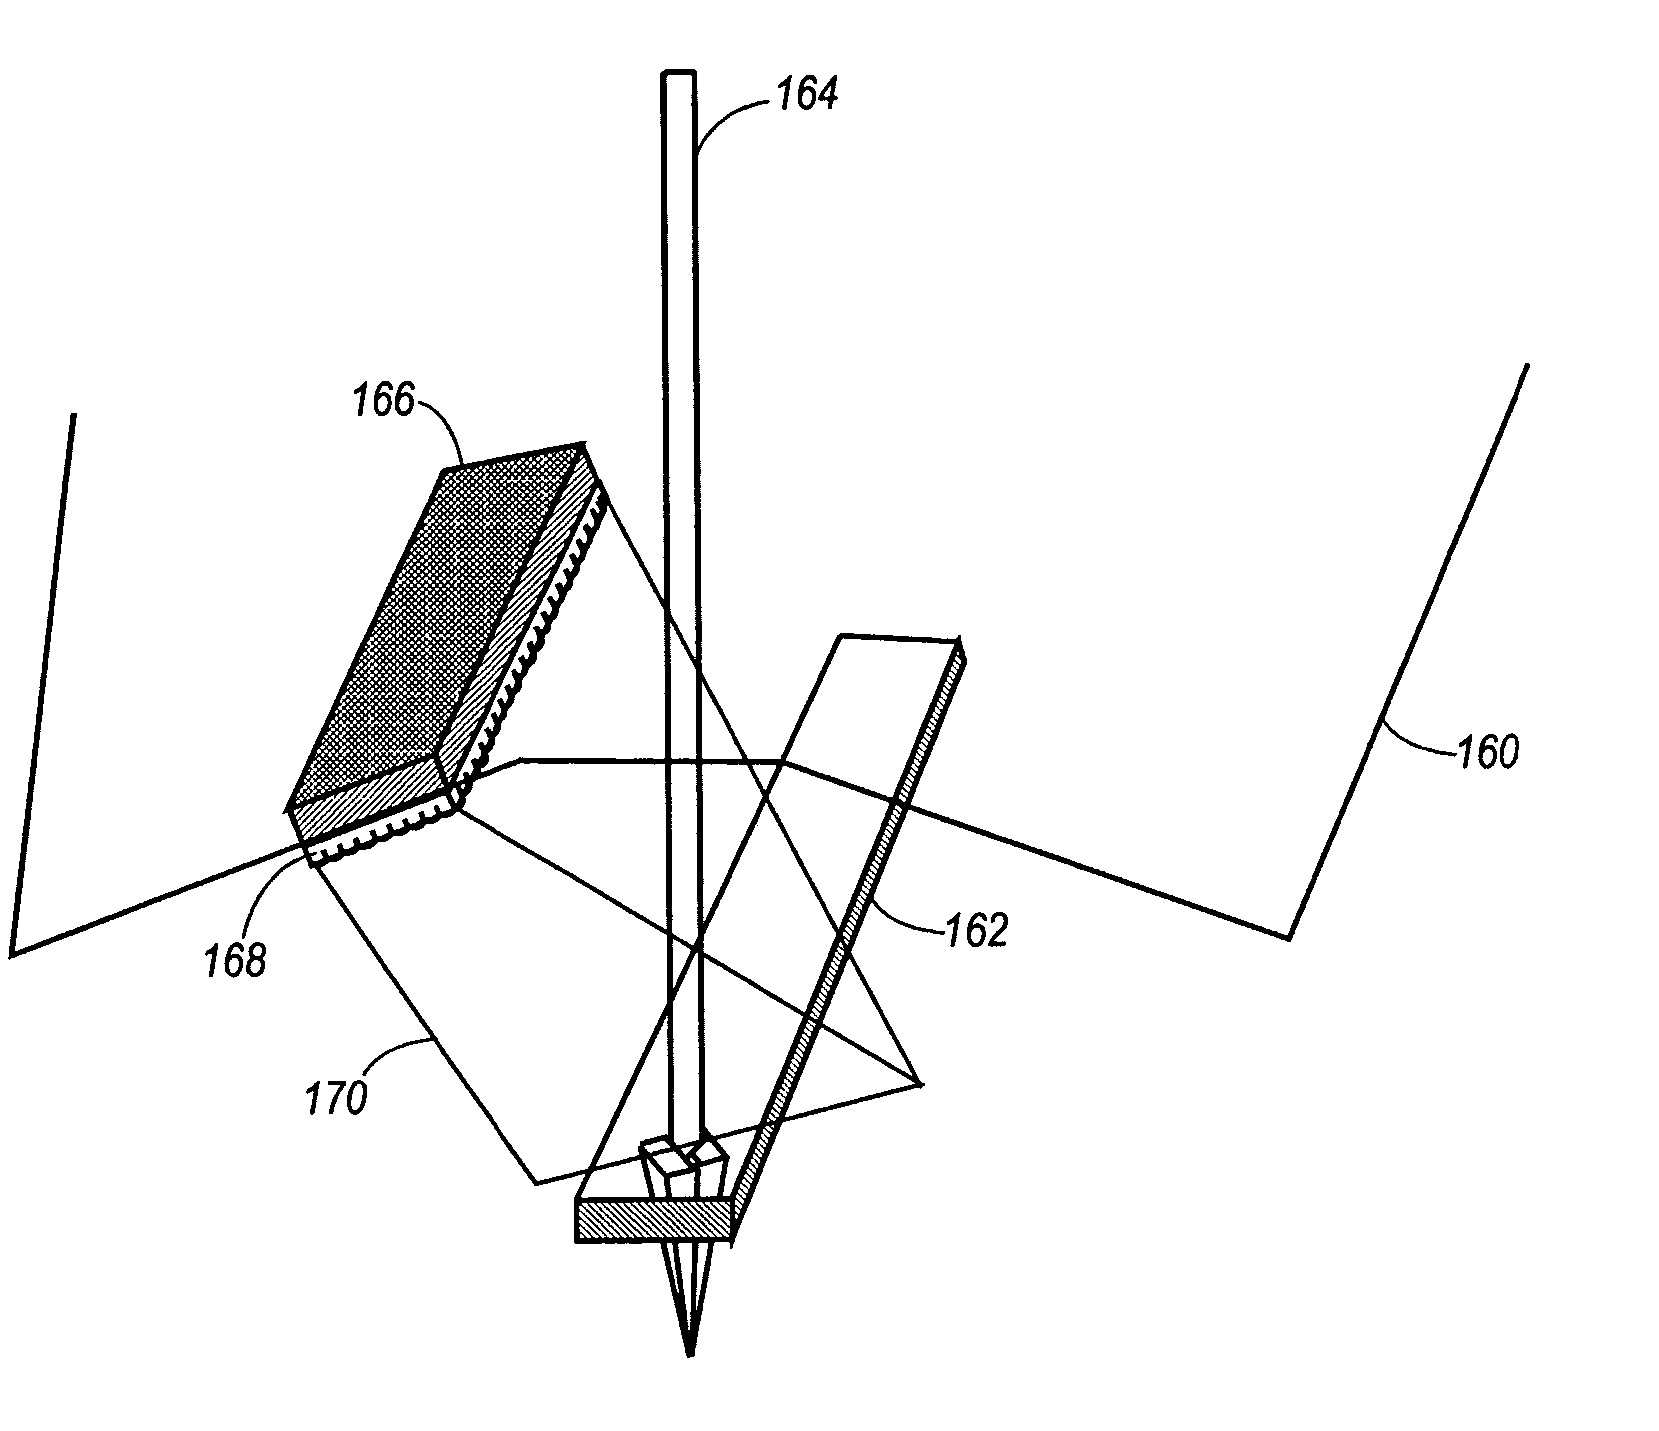 Alignment-tolerant lens structures for acoustic force actuation of cantilevers